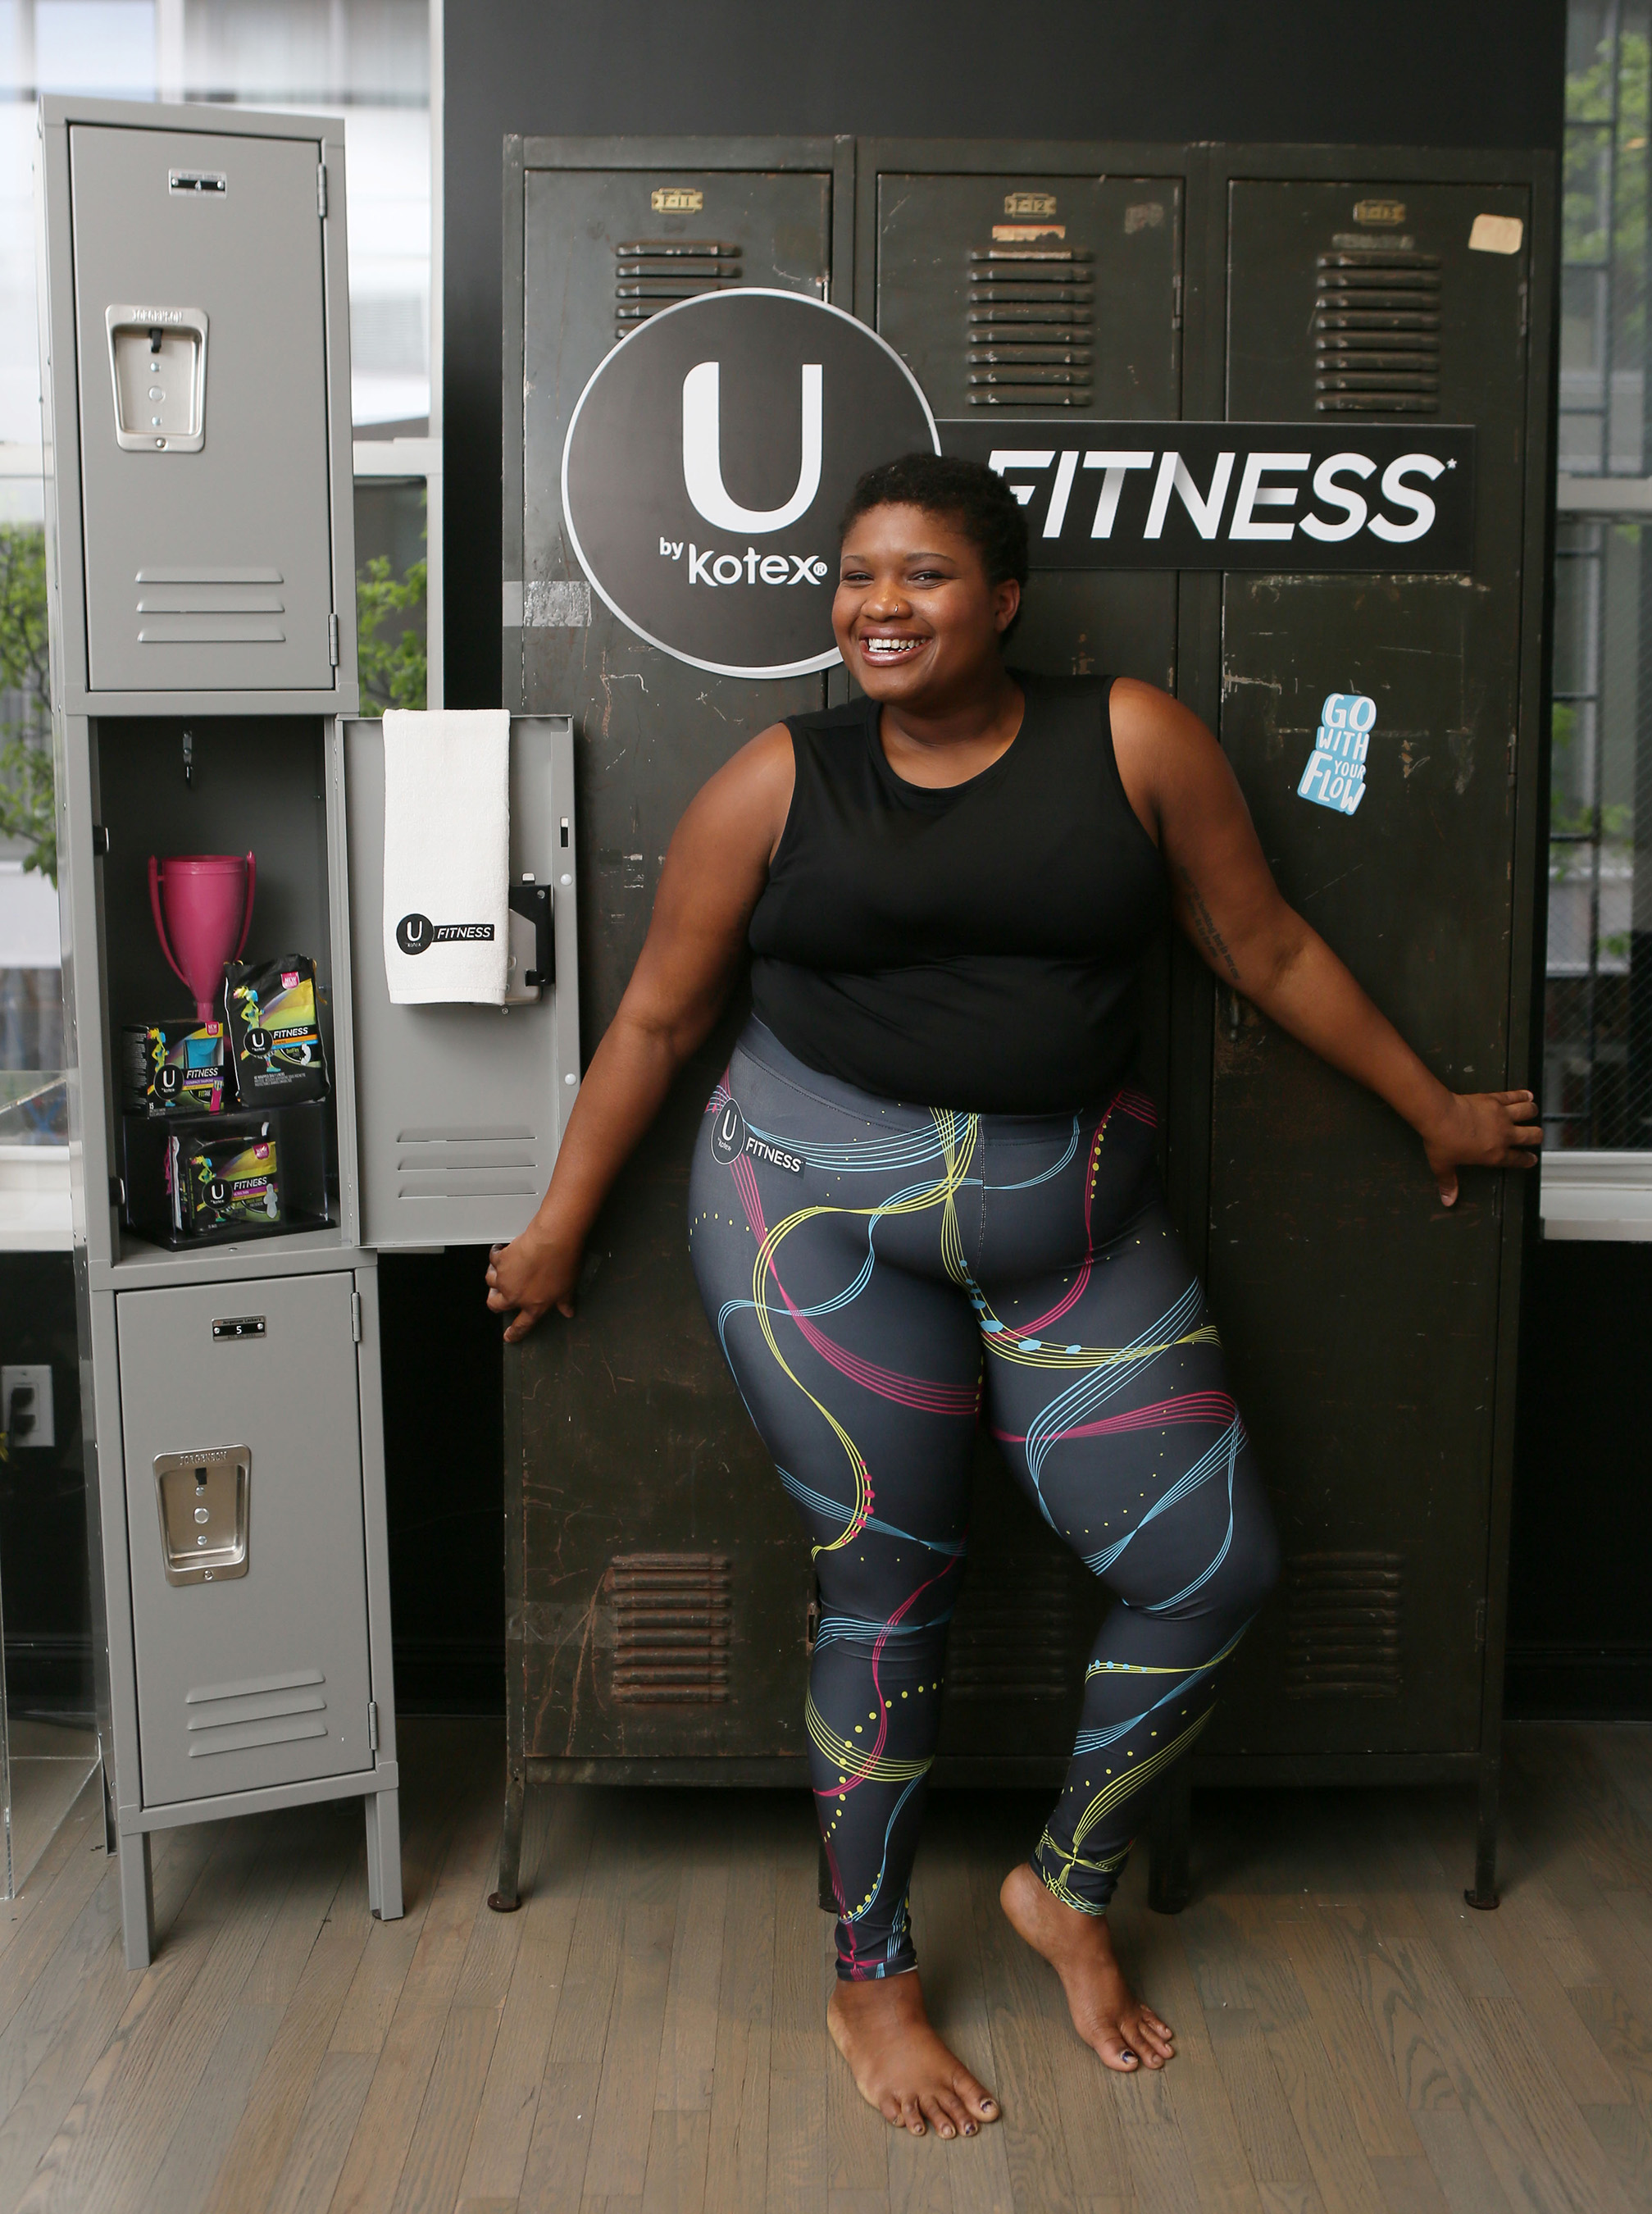 Yoga teacher and body positivity advocate Jessamyn Stanley hosts a private class in New York City to celebrate the launch of the NEWU by Kotex® FITNESS* line on Thursday, April 27, 2017. (Stuart Ramson/AP Images for U by Kotex® FITNESS)